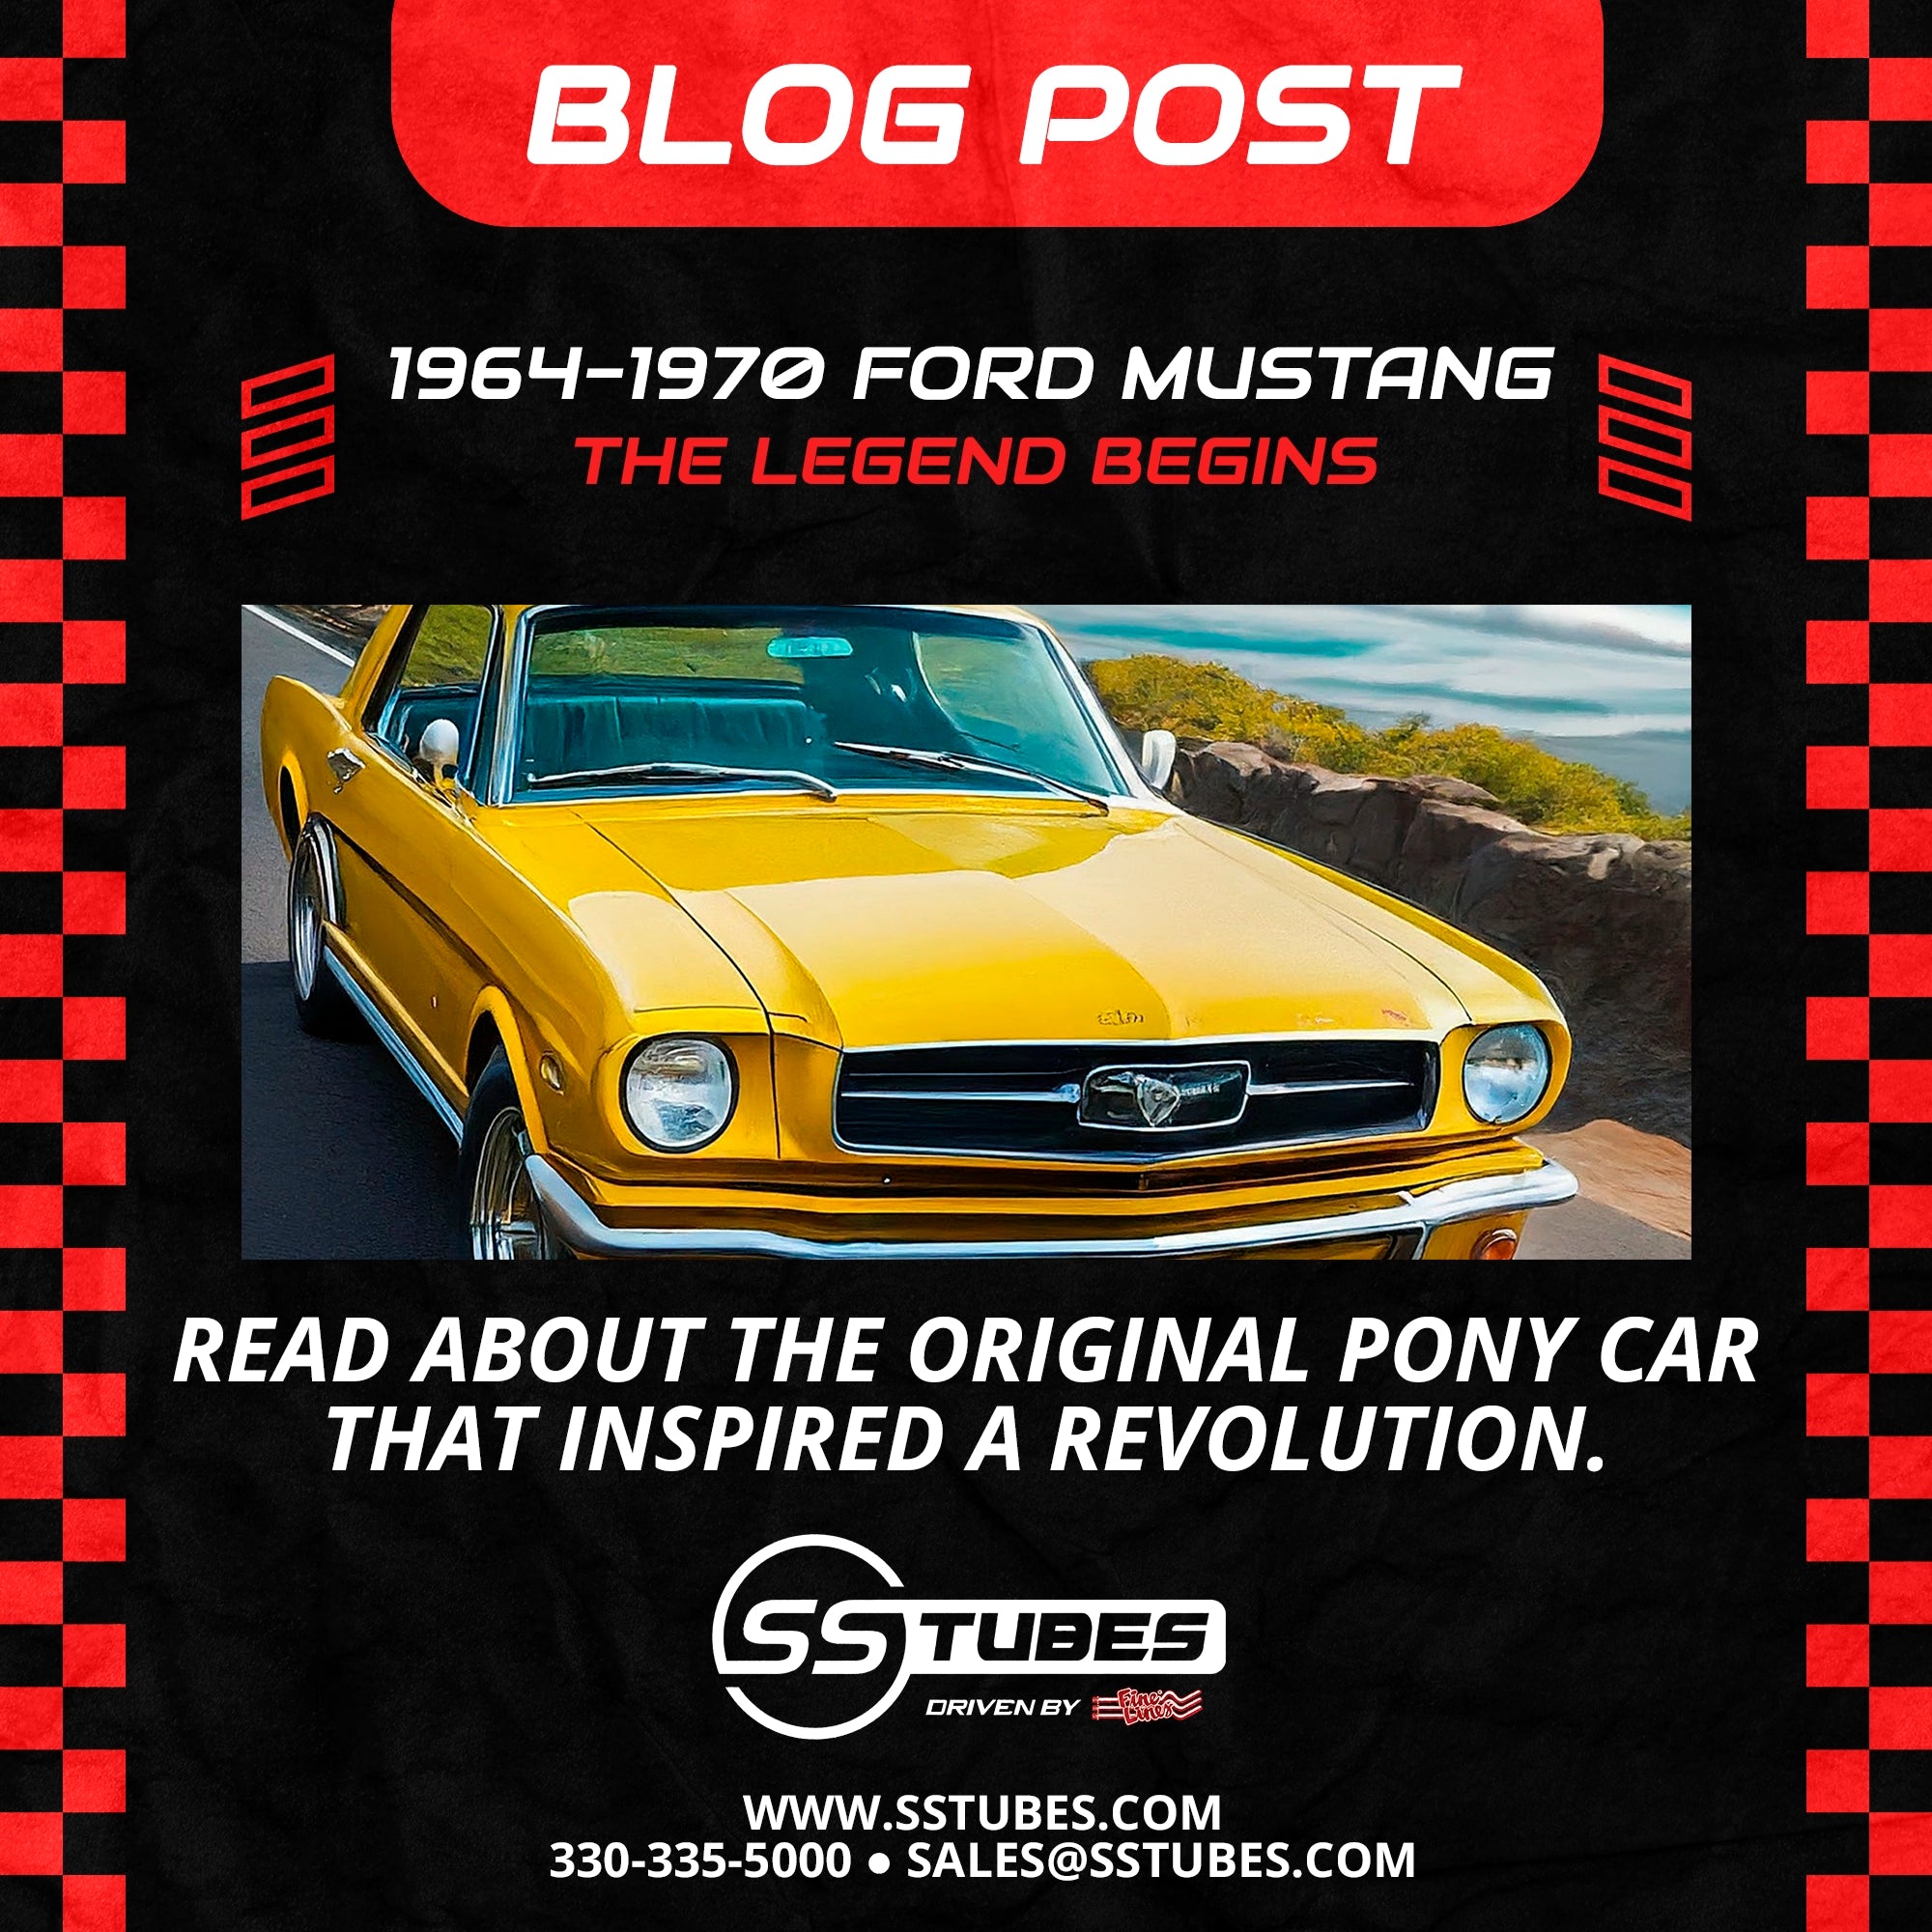 The Galloping Legend: 1964-1970 Ford Mustang